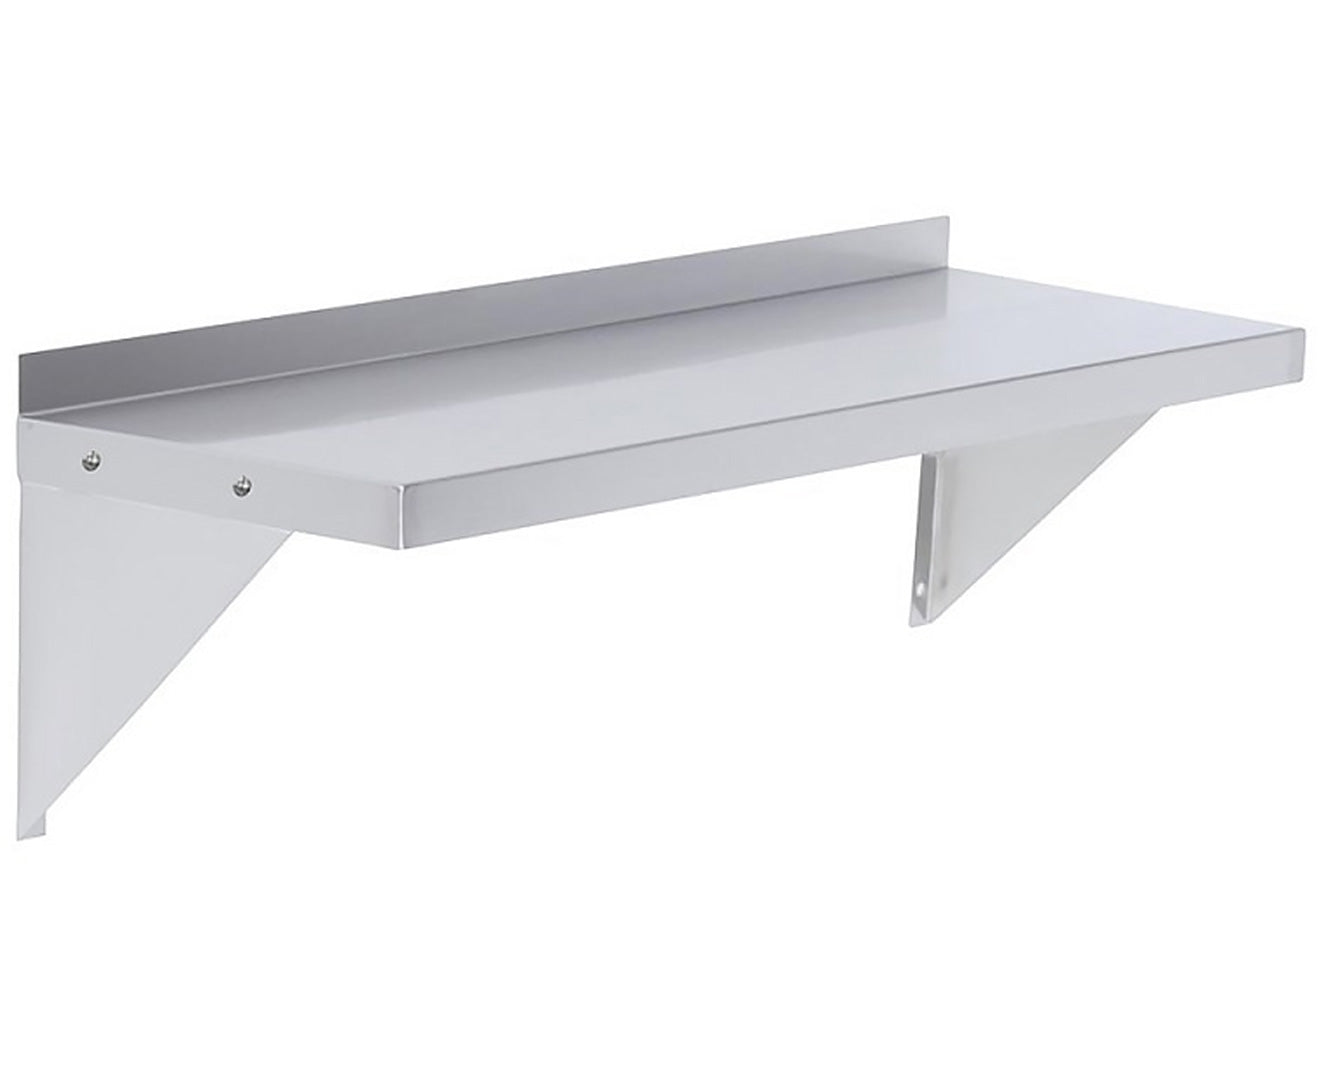 610x356mm Stainless Wall Mounted Shelf